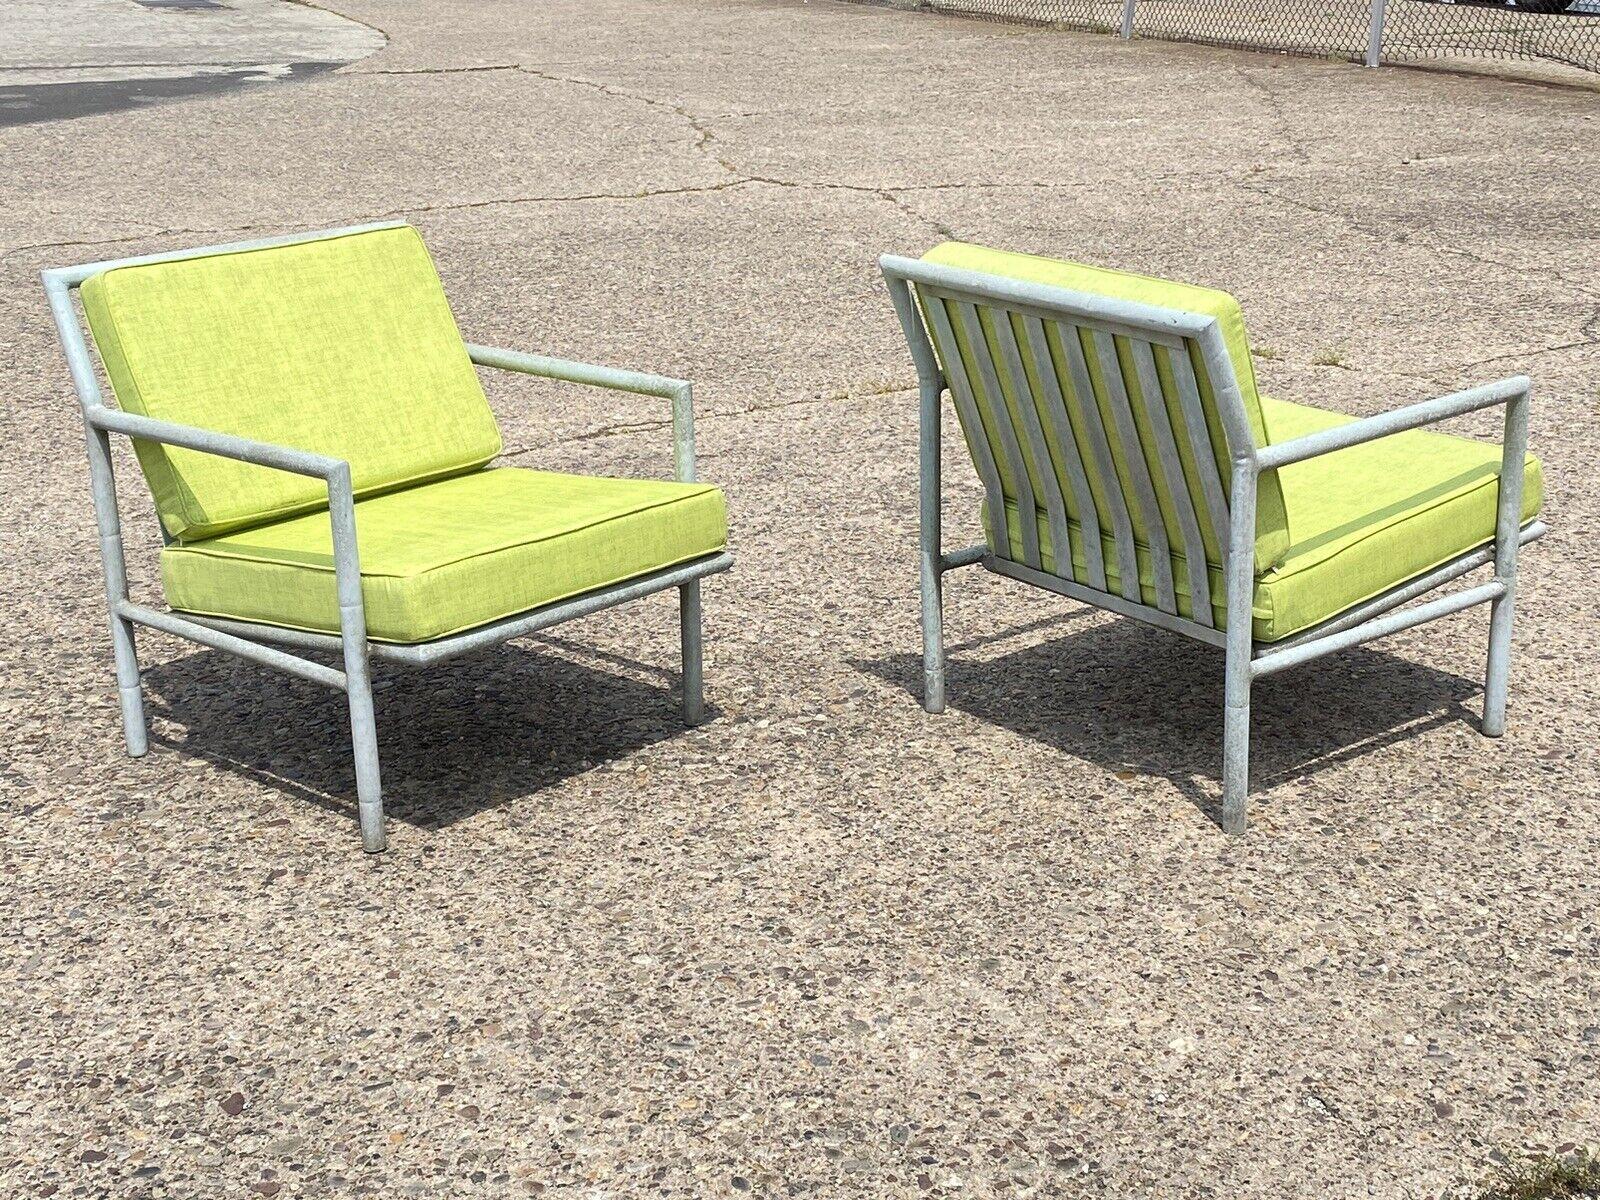 Mid-Century Modern / Hollywood Regency Faux Bamboo Aluminum Pool Patio Sofa Set - 5 Pc Set. Believed to be by Hauser. Set is unmarked. Item features a cast aluminum faux bamboo design frames, vinyl strap seats (vinyl straps in great condition), very